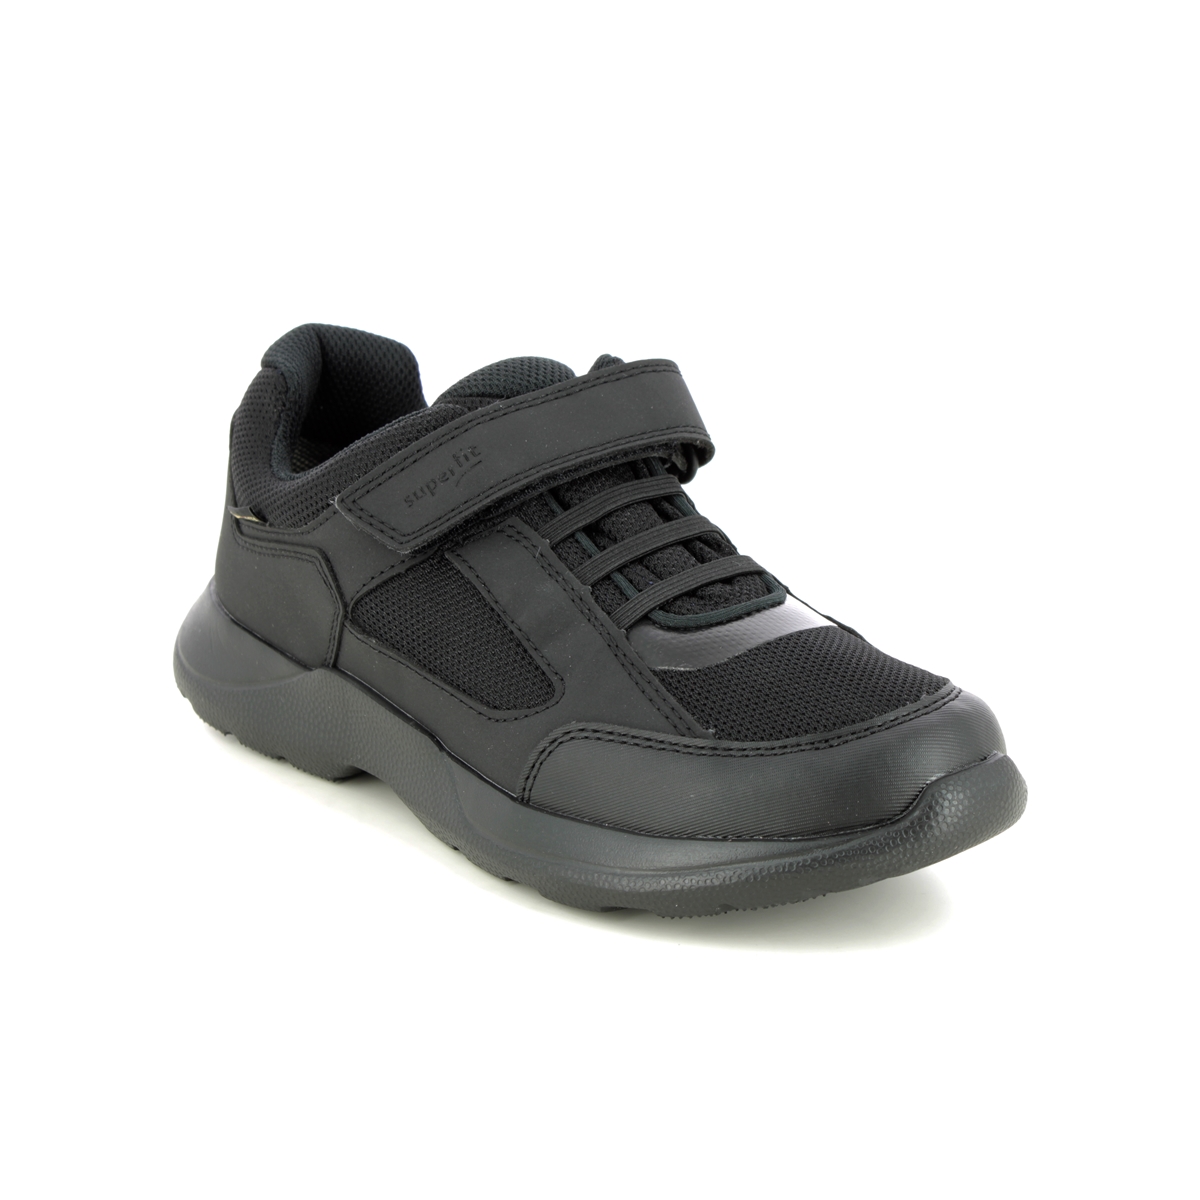 Superfit Rush Gtx Bungee Black Kids Trainers 1006223-0000 In Size 32 In Plain Black For kids